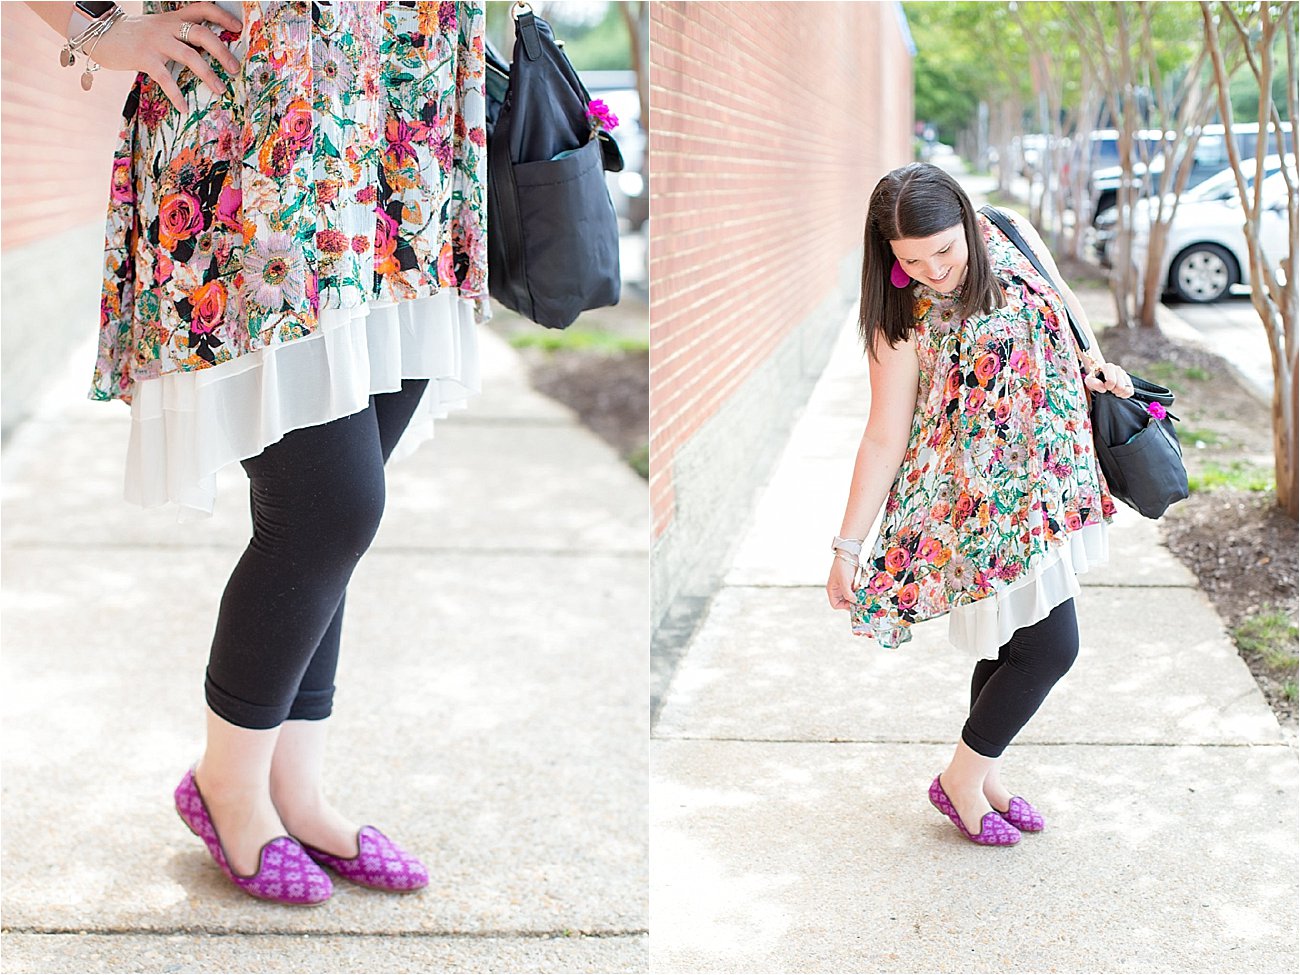 Grace & Lace floral tunic, chiffon lace extender, LulaRoe black leggings, Lily Jade diaper bag, Nickel and Suede earrings, The Root Collective "Millie" smoking shoes | North Carolina Fashion Blogger (5)